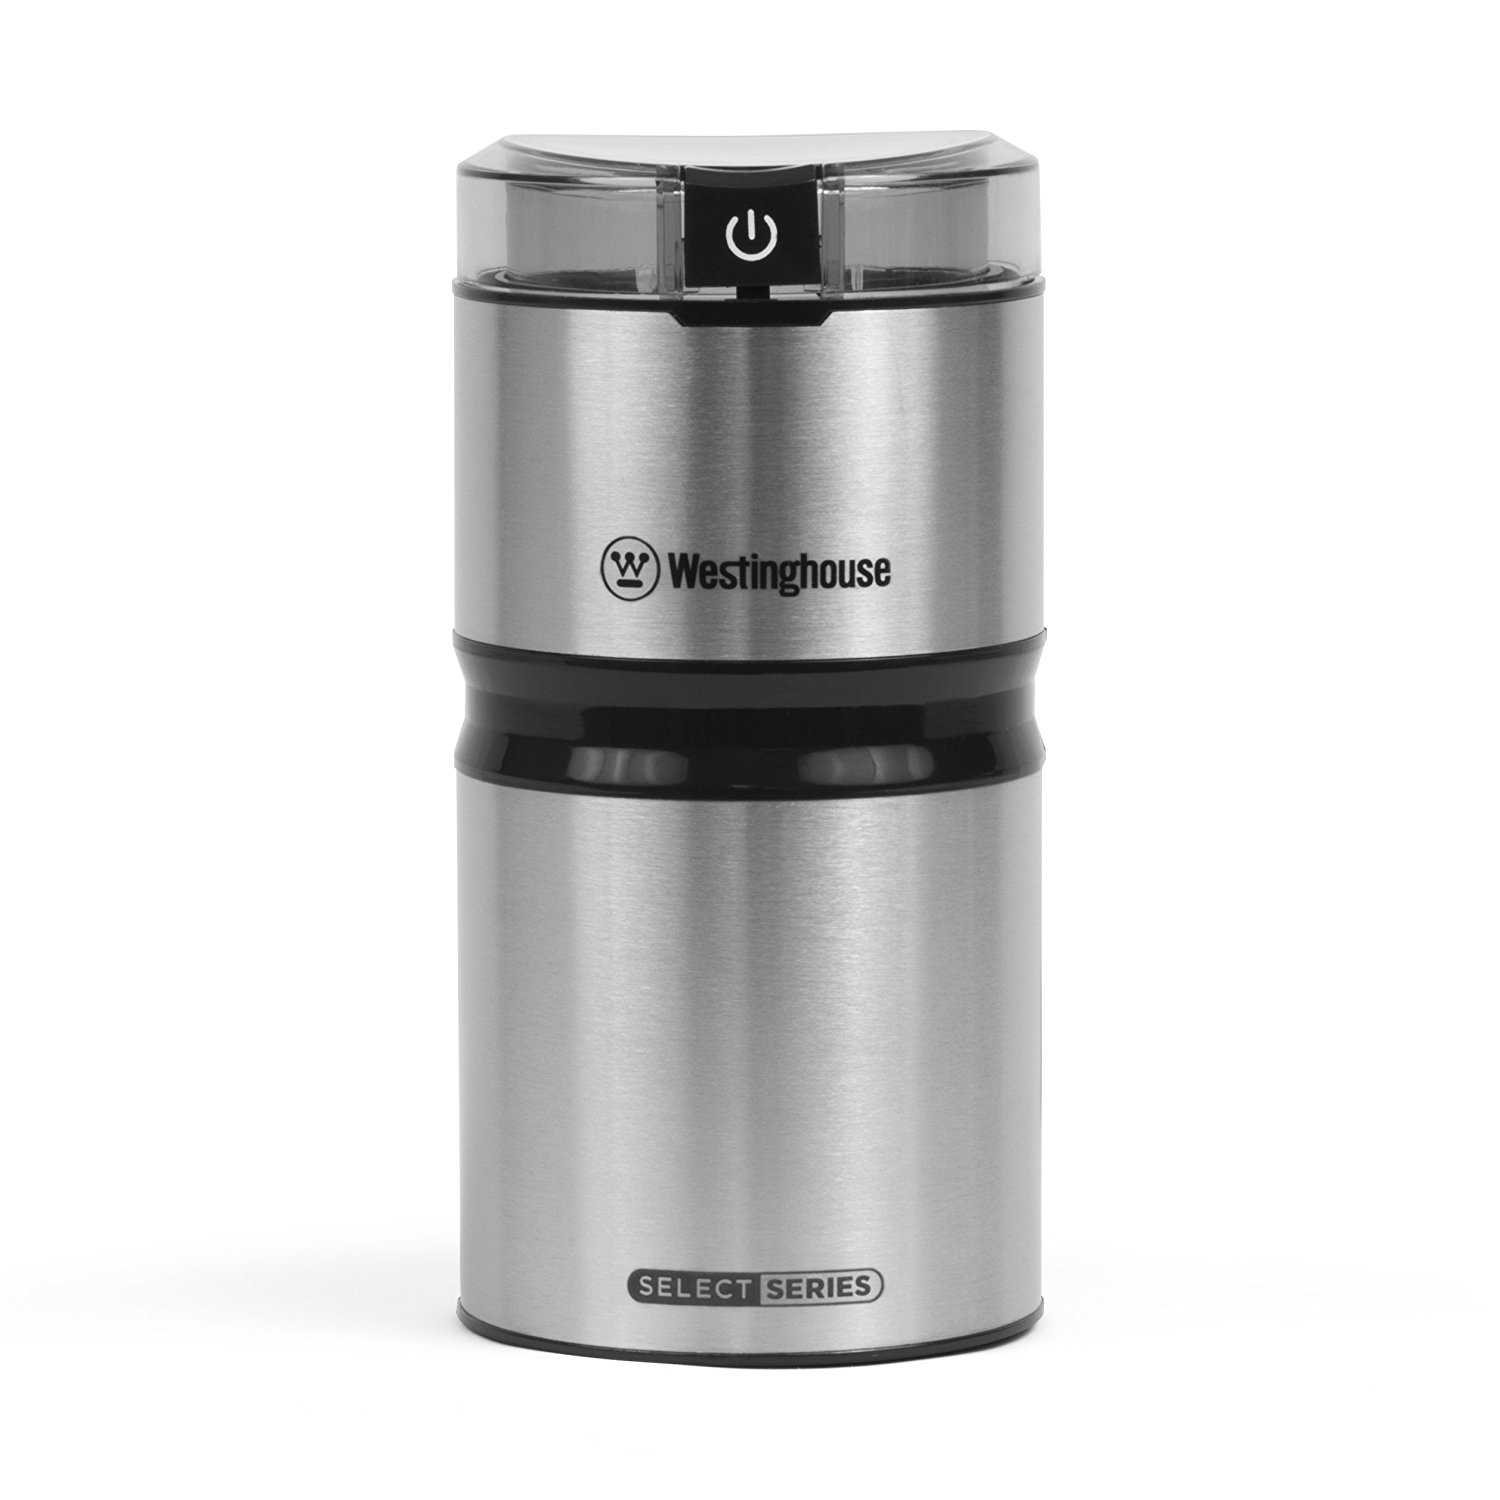  Westinghouse WCG21SSA Select Series Stainless Steel Electric Coffee and Spice Grinder 